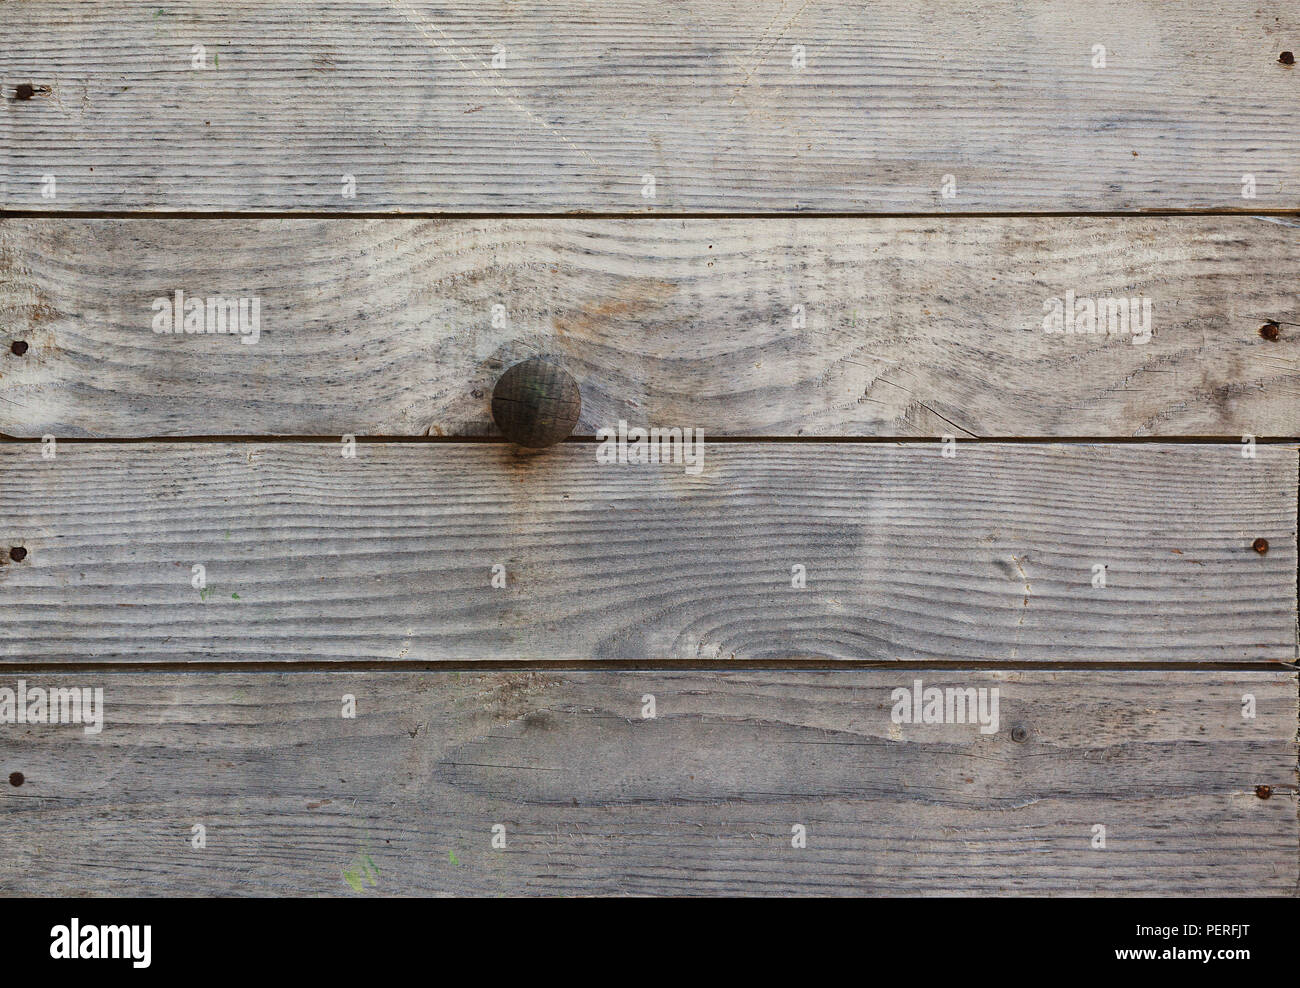 Old wooden texture, closeup view on dirt and structure. Stock Photo